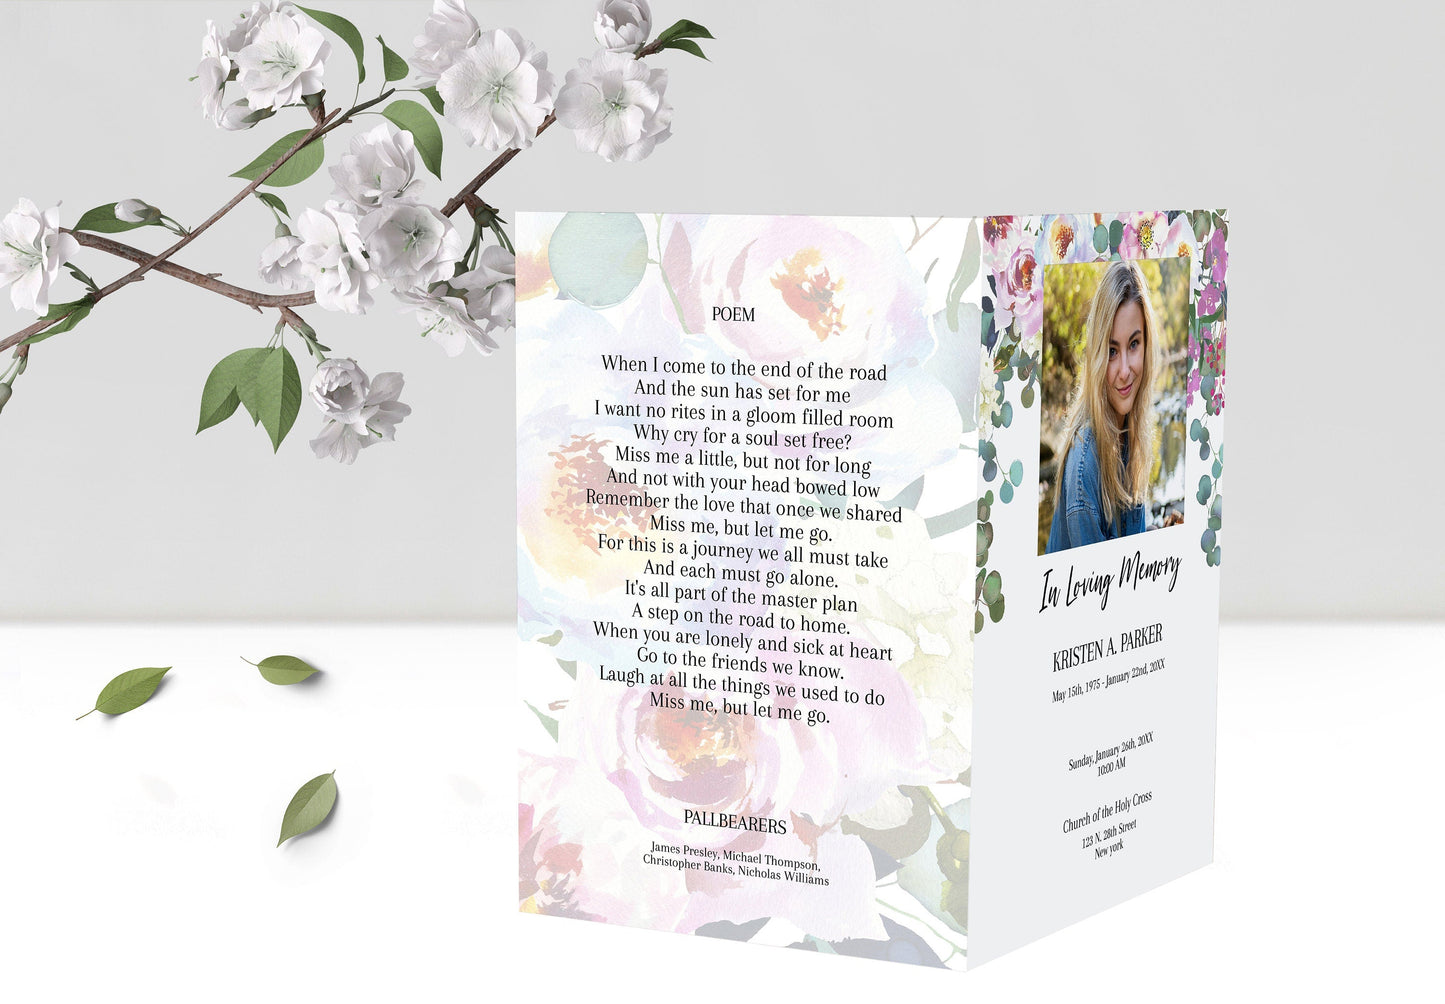 Floral Funeral Program Pamphlet for Woman - 4 Page